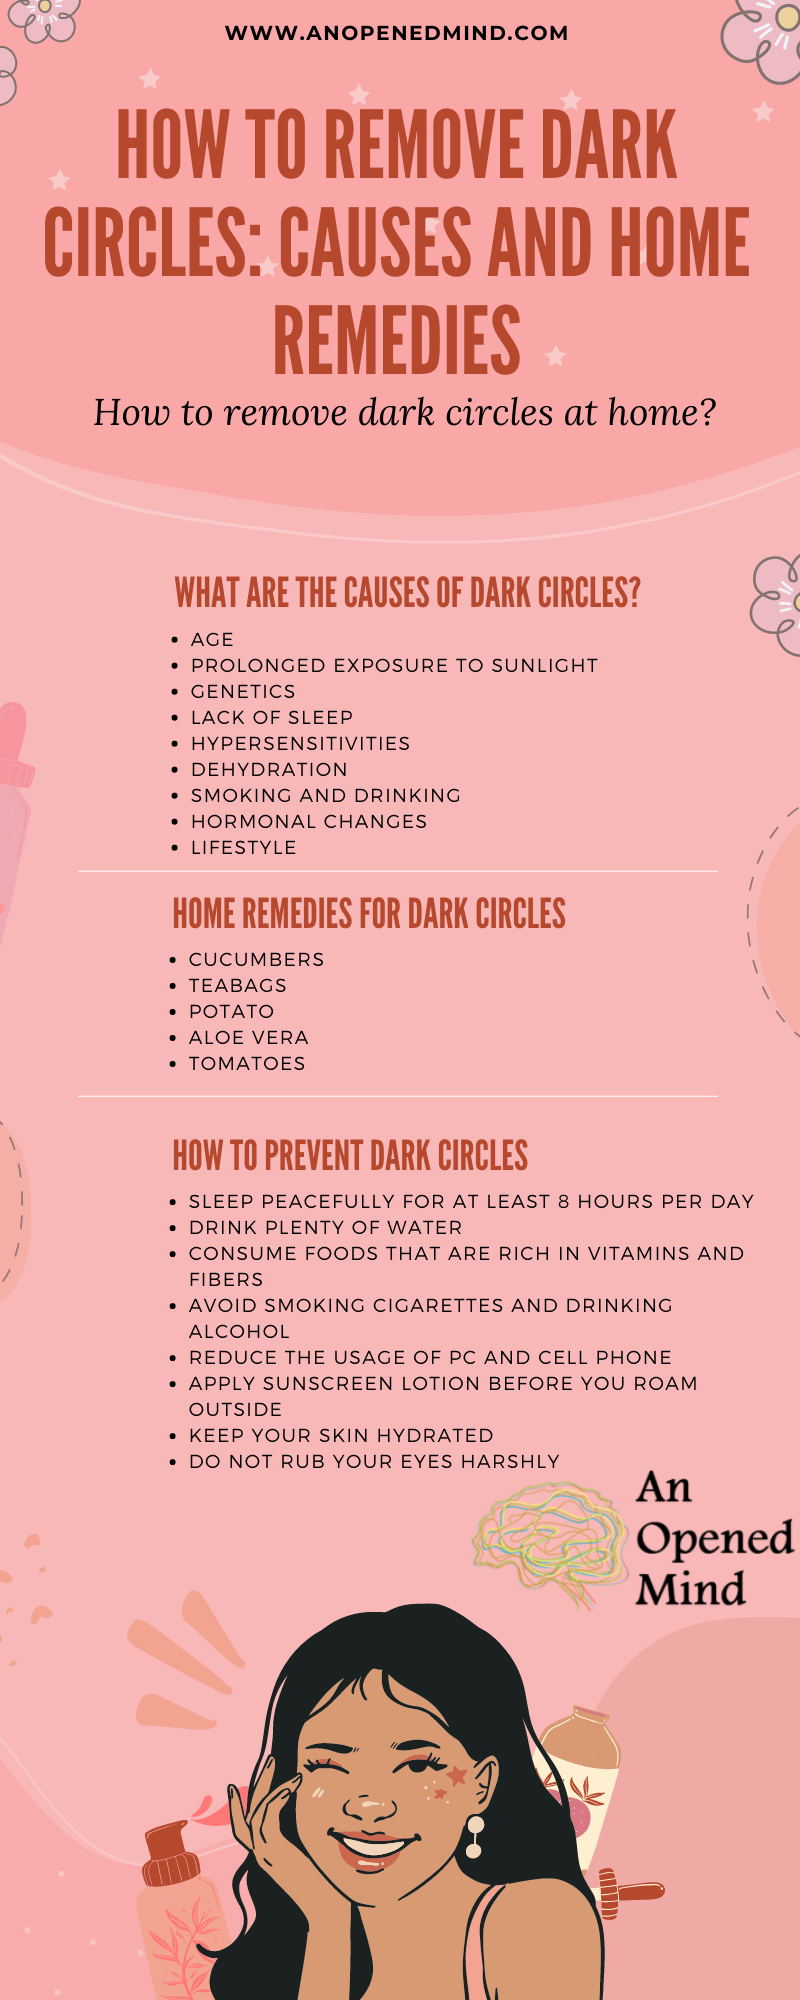 How to Remove Dark Circles Causes and Home Remedies